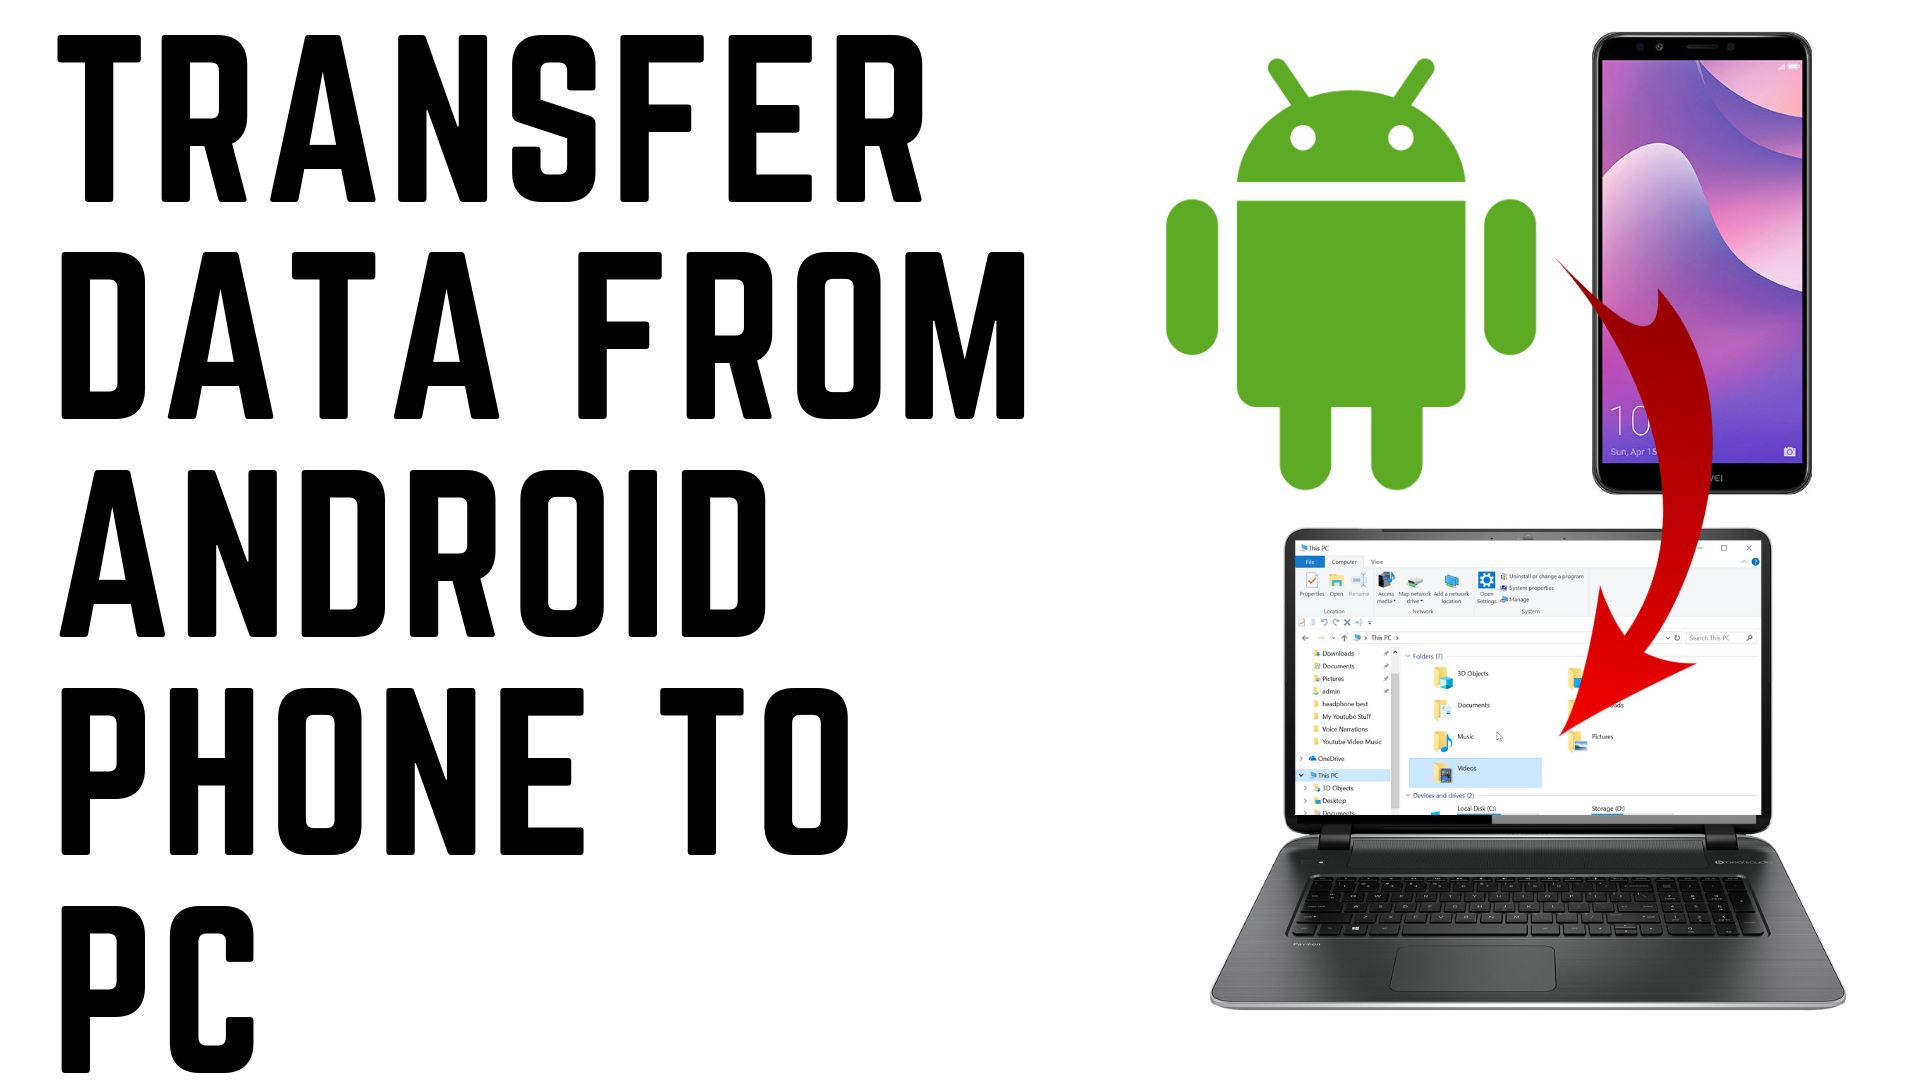 Transfer Data From Android Phone to PC